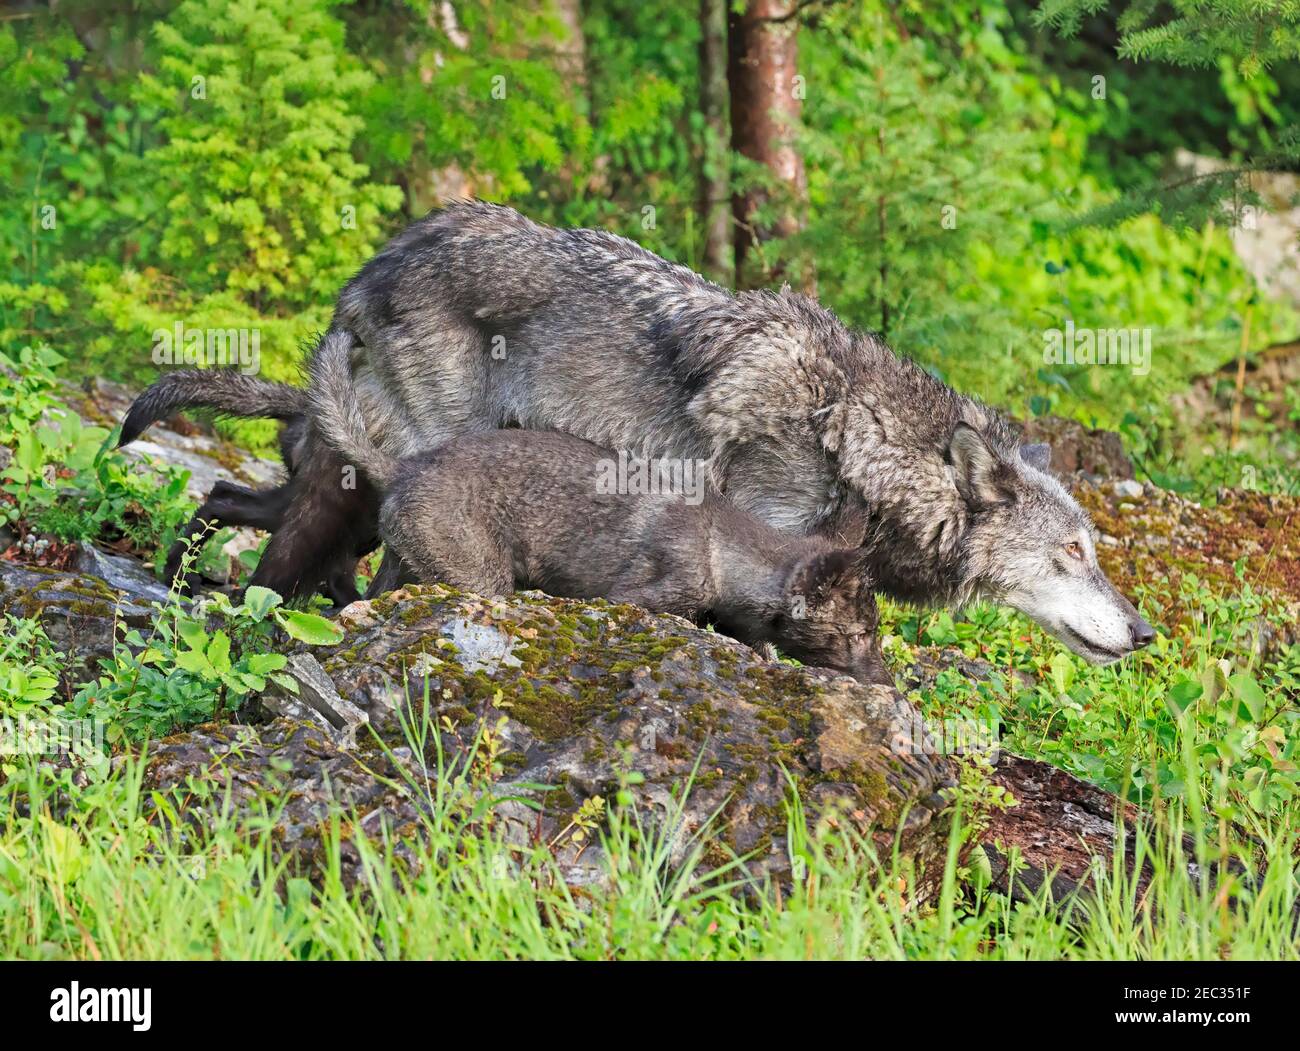 Gray wolf, Canis lupus, mother teaching pup.  A grey wolf puppy is learning how to stalk prey. Stock Photo